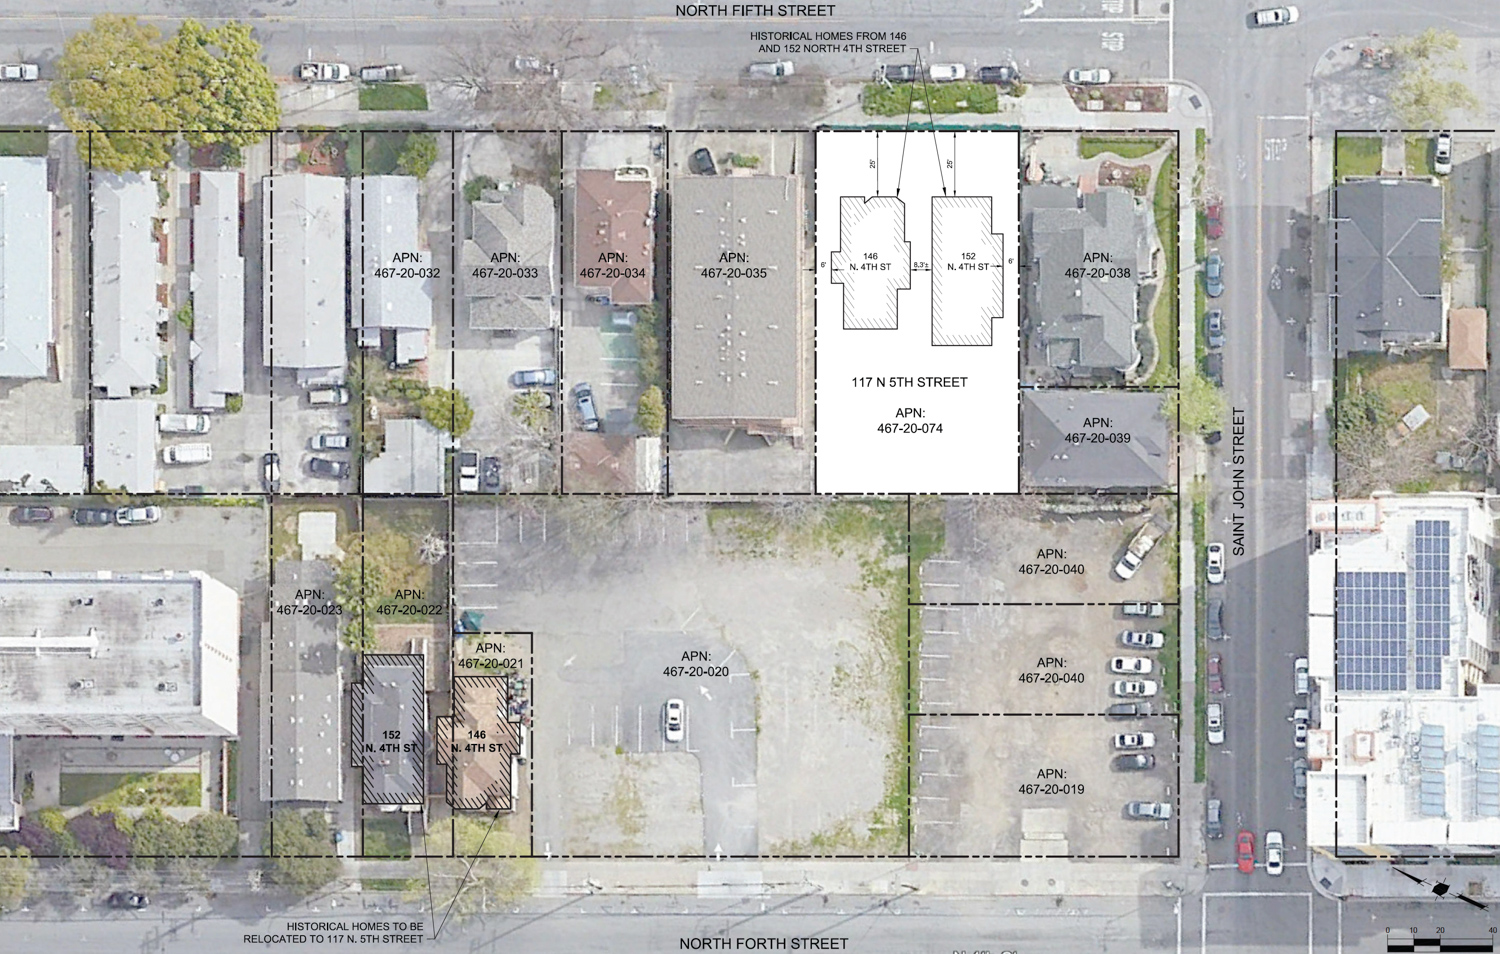 100 North 4th Street and the proposed site for the Queen Anne houses, image by author